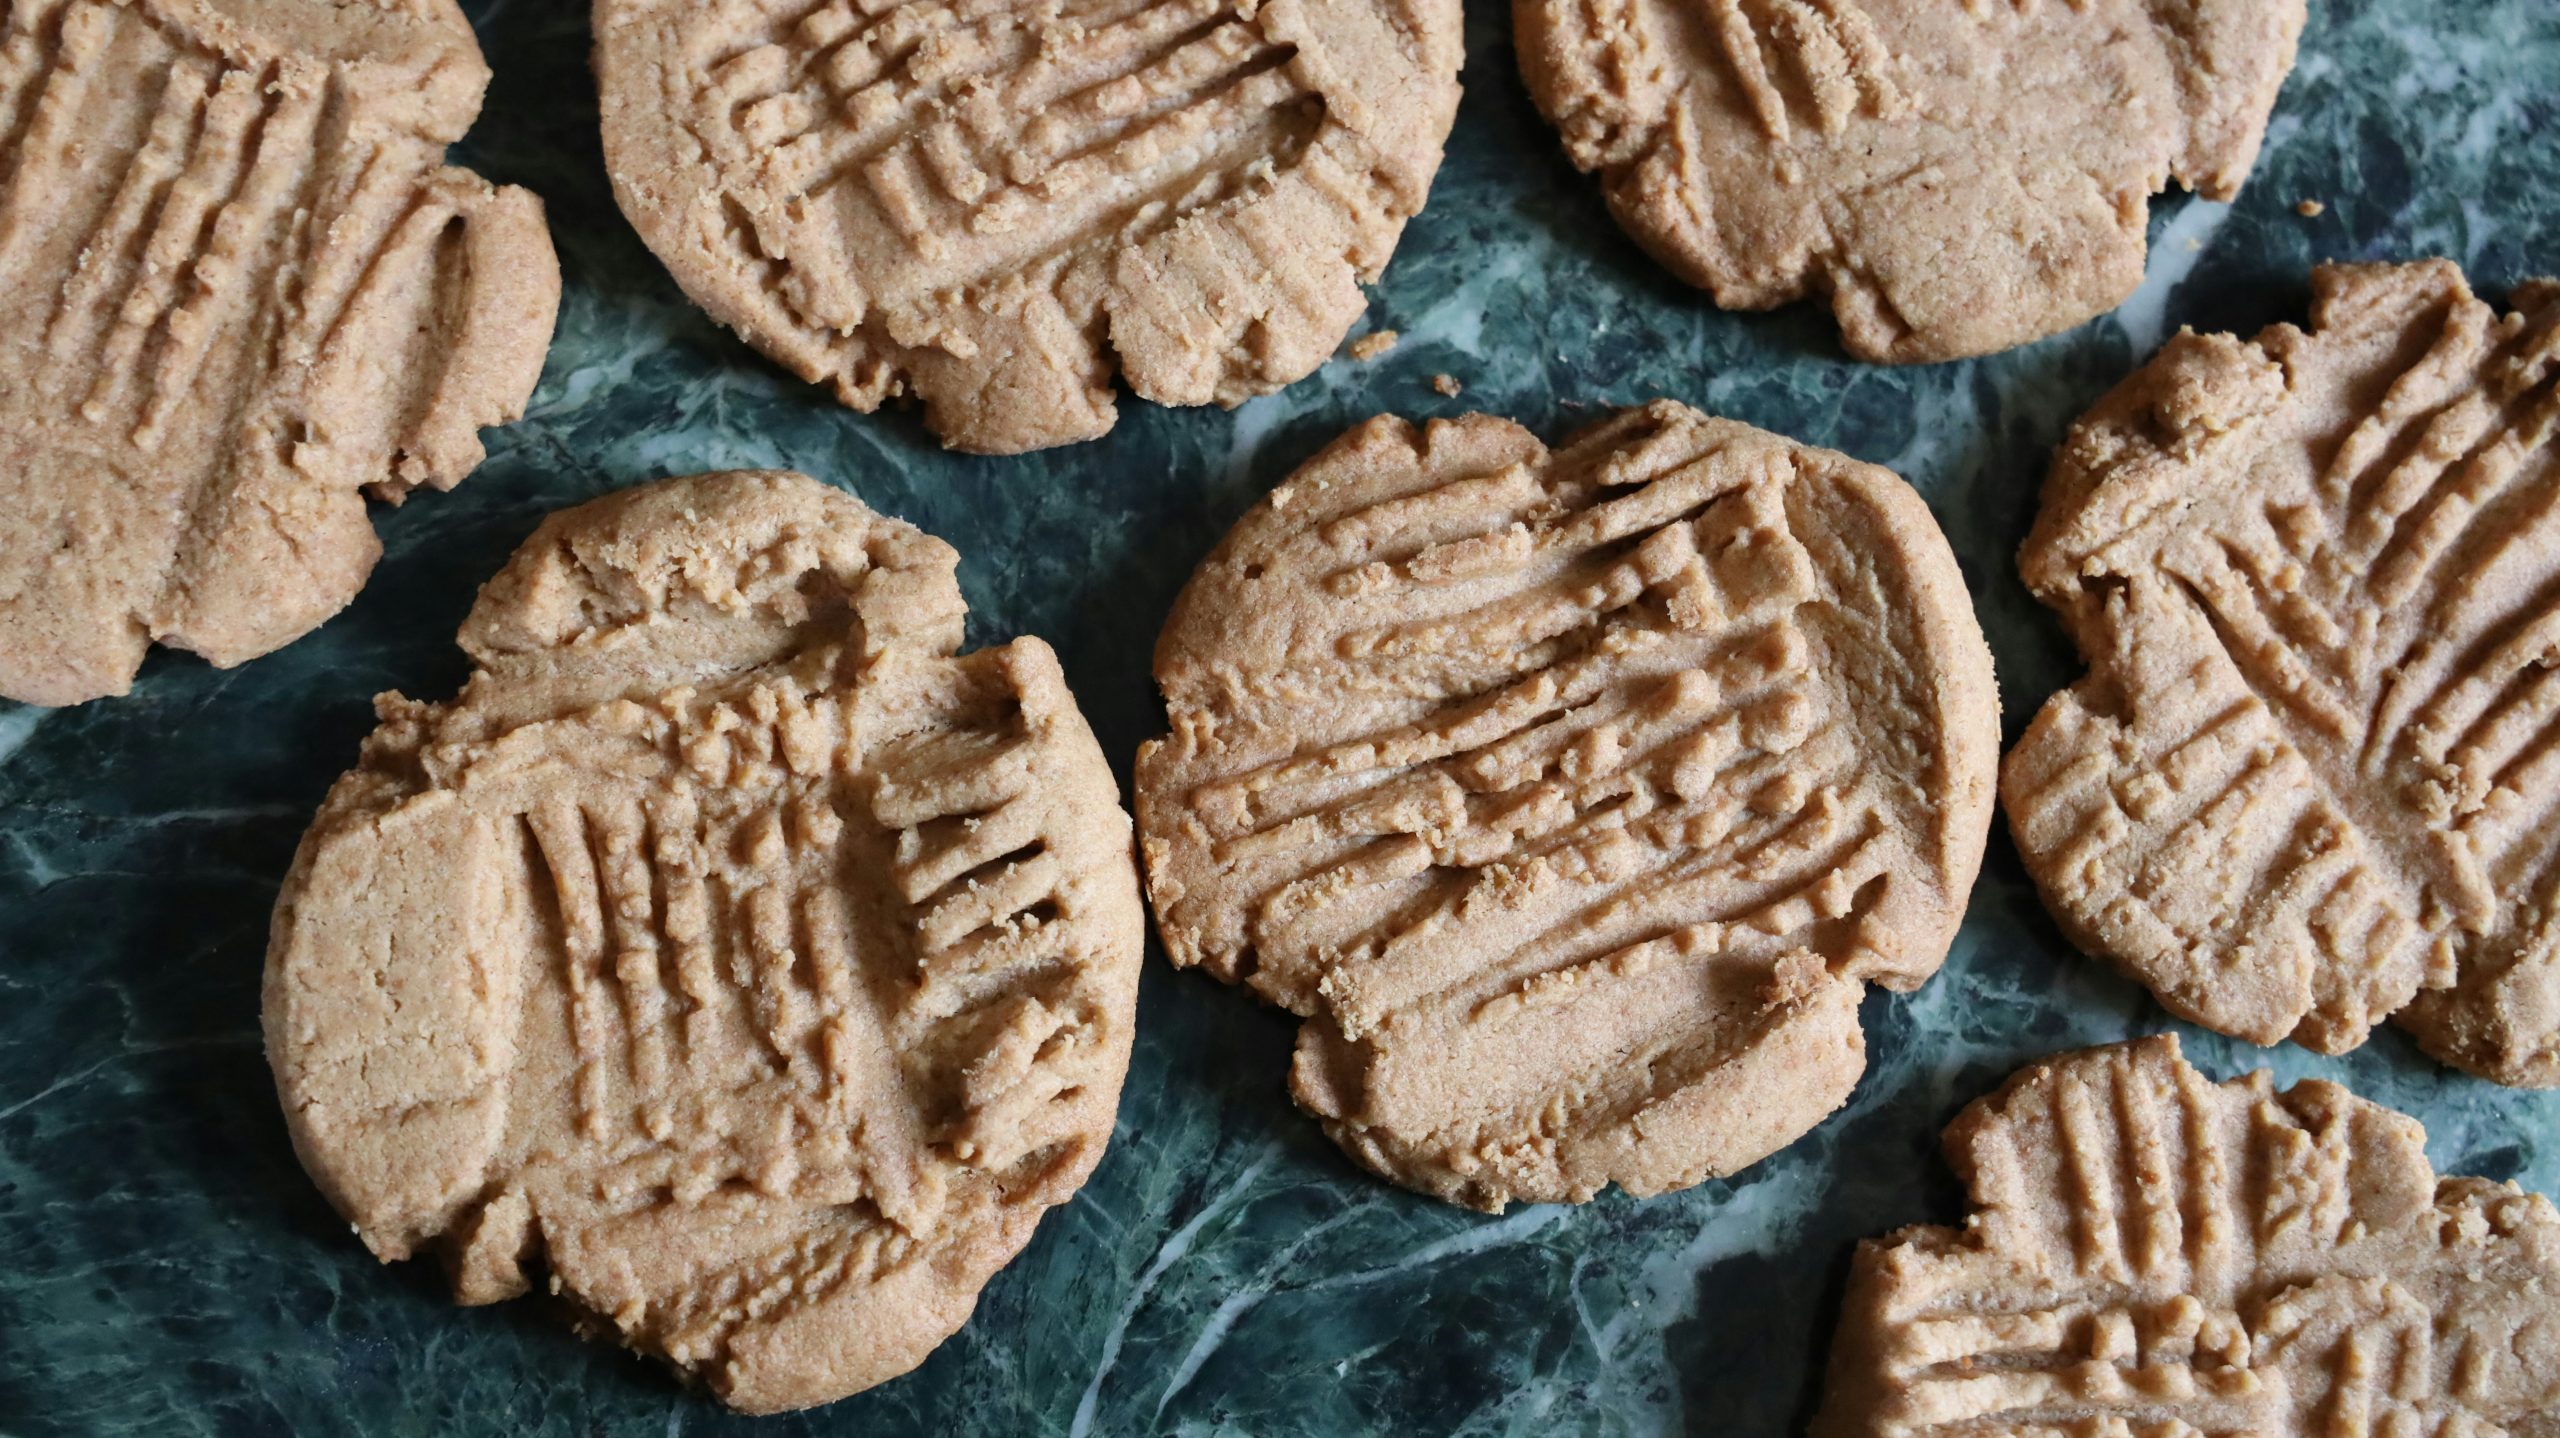 Peanut butter cookies on a marble counter, a delectable dessert.